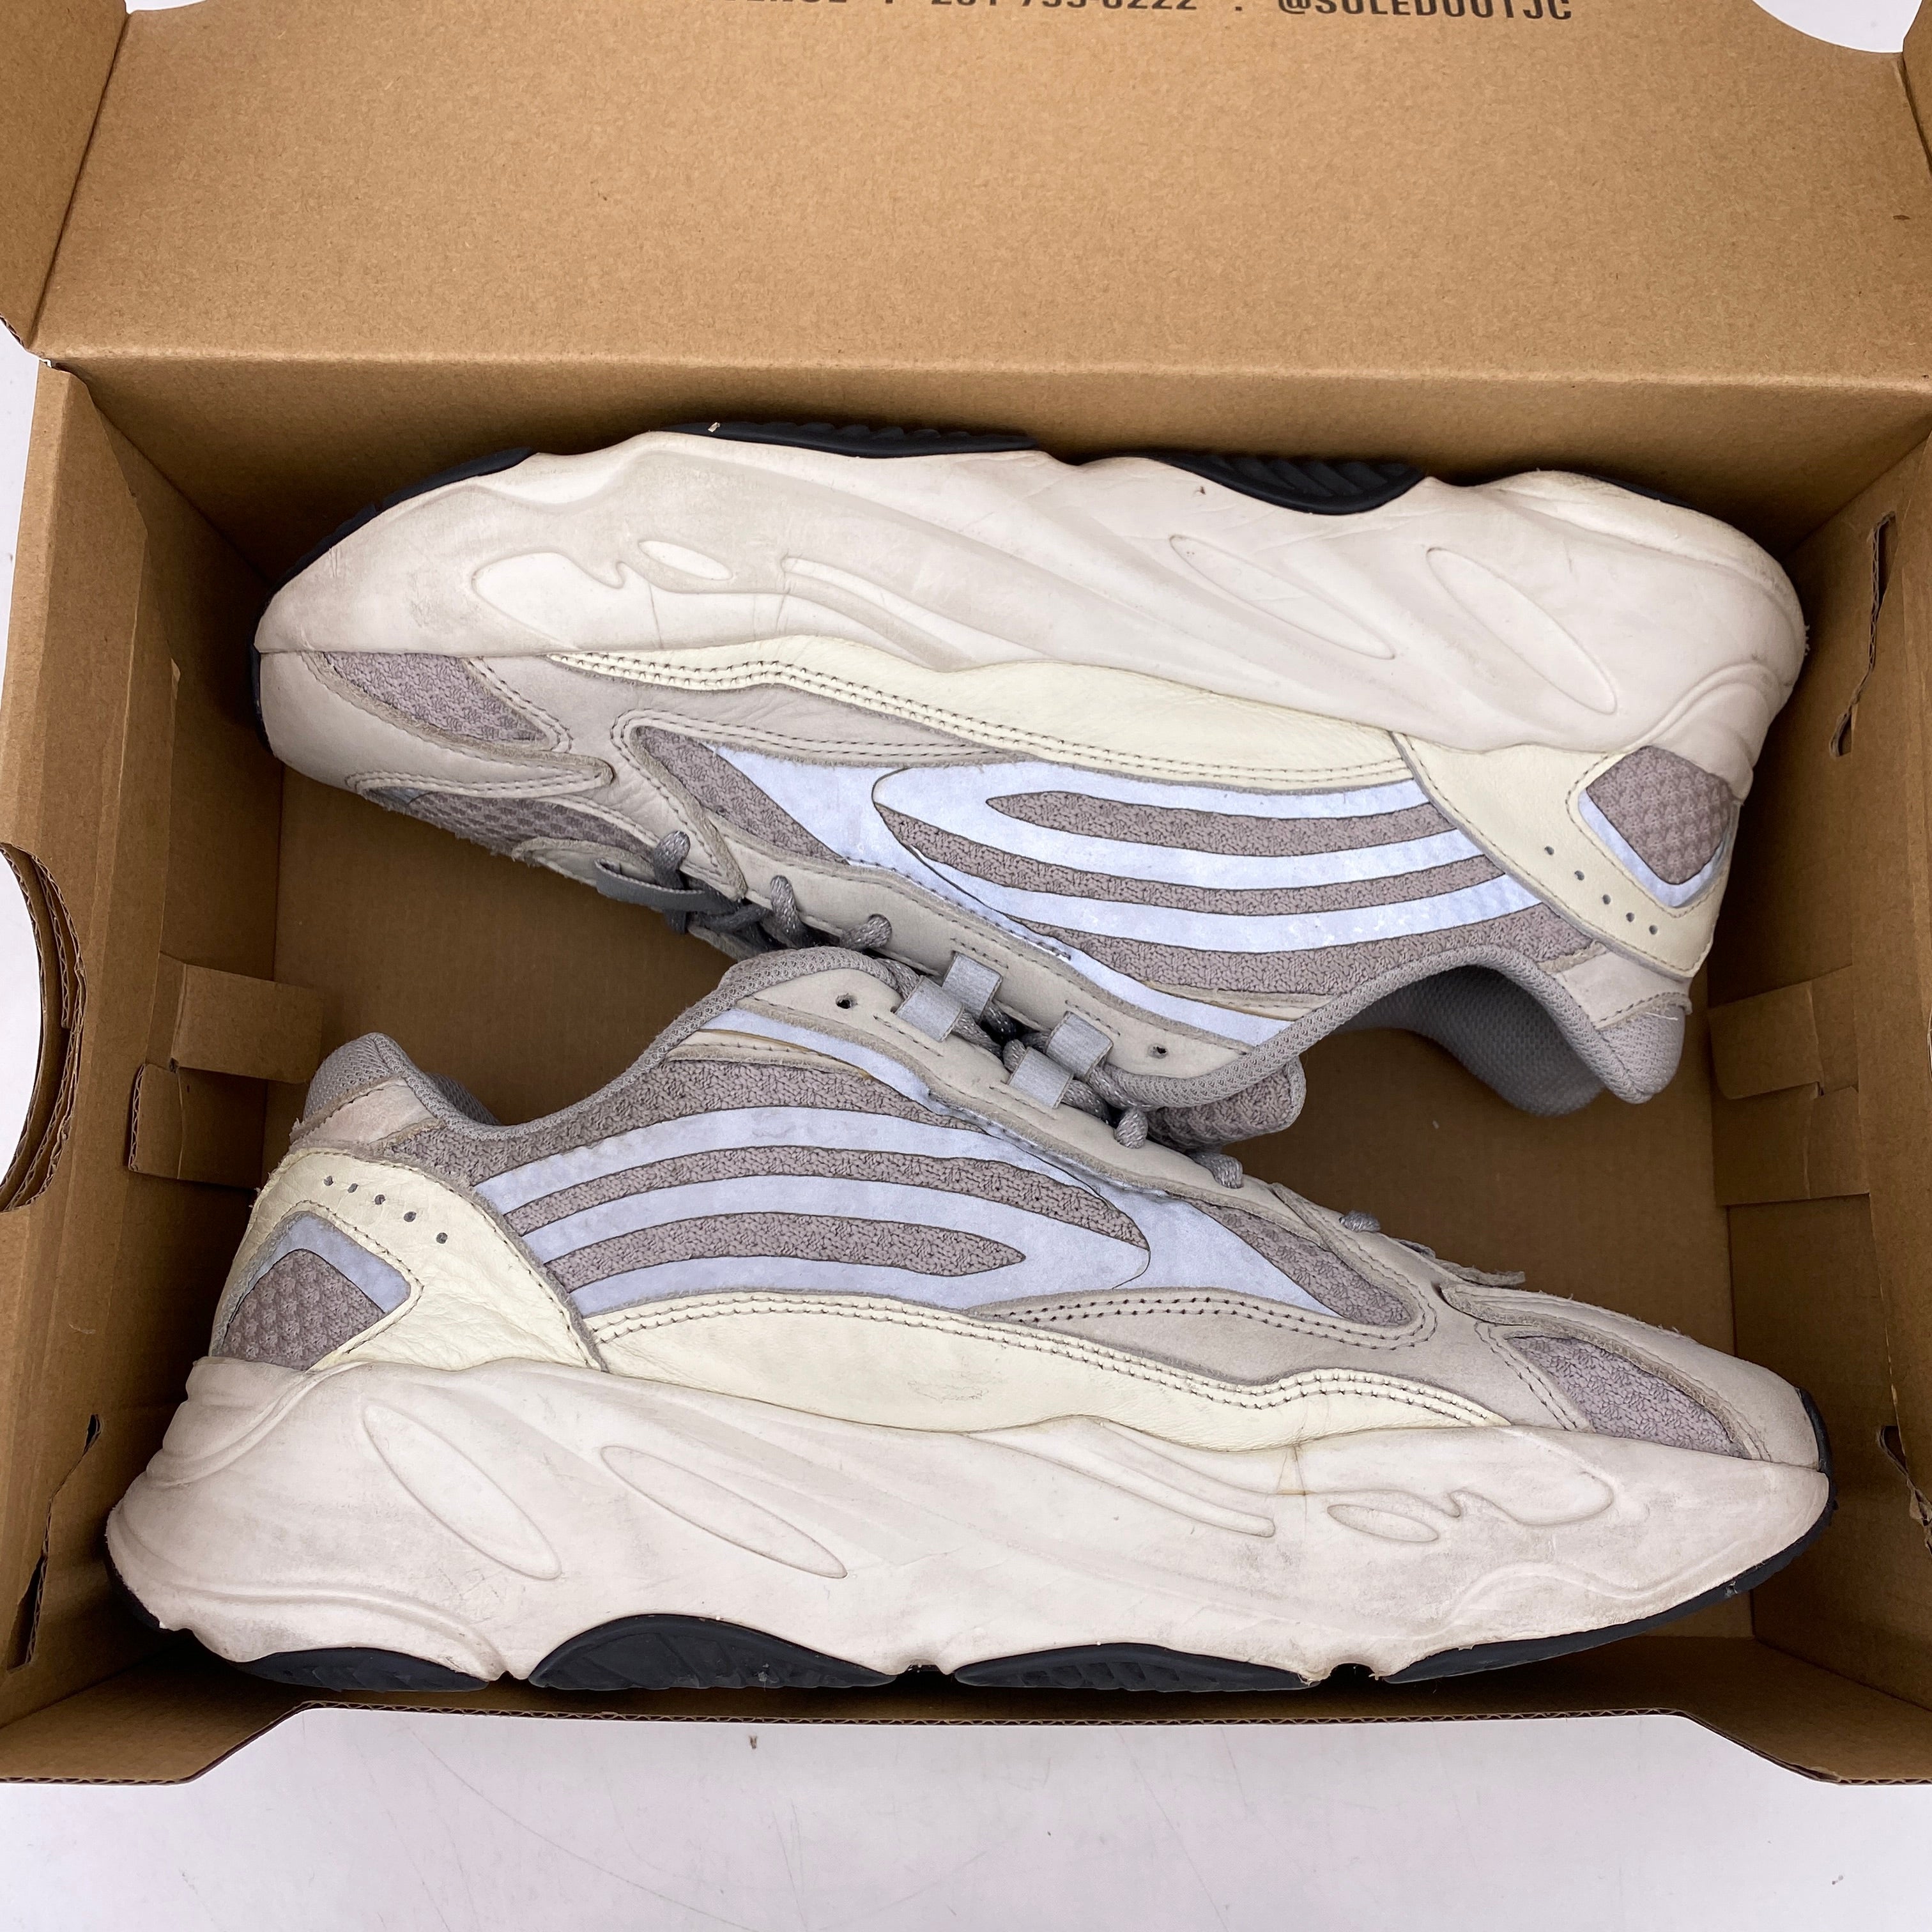 Yeezy 700 v2 &quot;Static&quot; 2018 Used Size 10.5